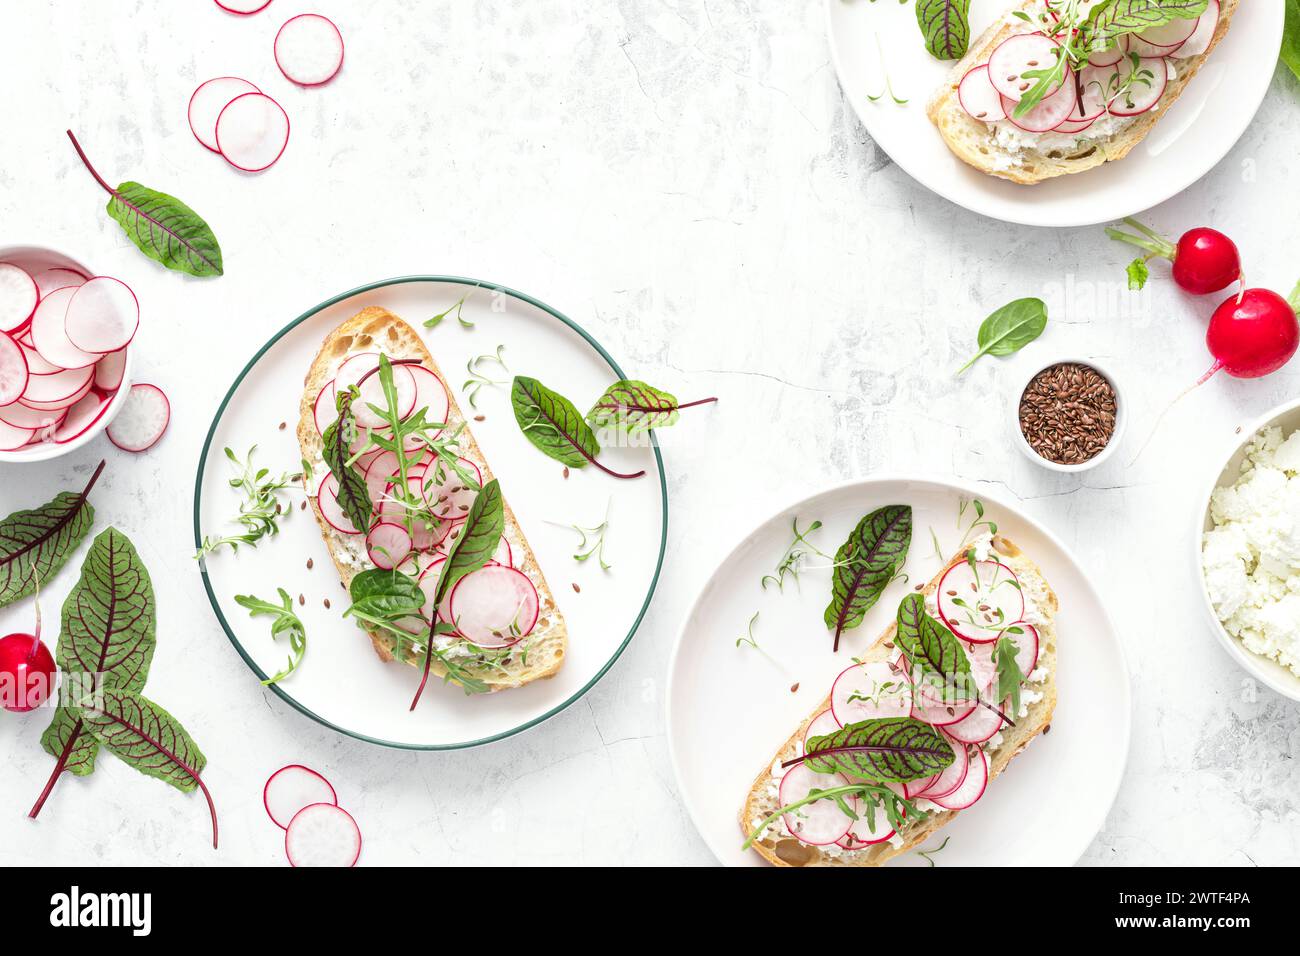 Radish sandwiches with cottage cheese and fresh green leaves, top down view Stock Photo